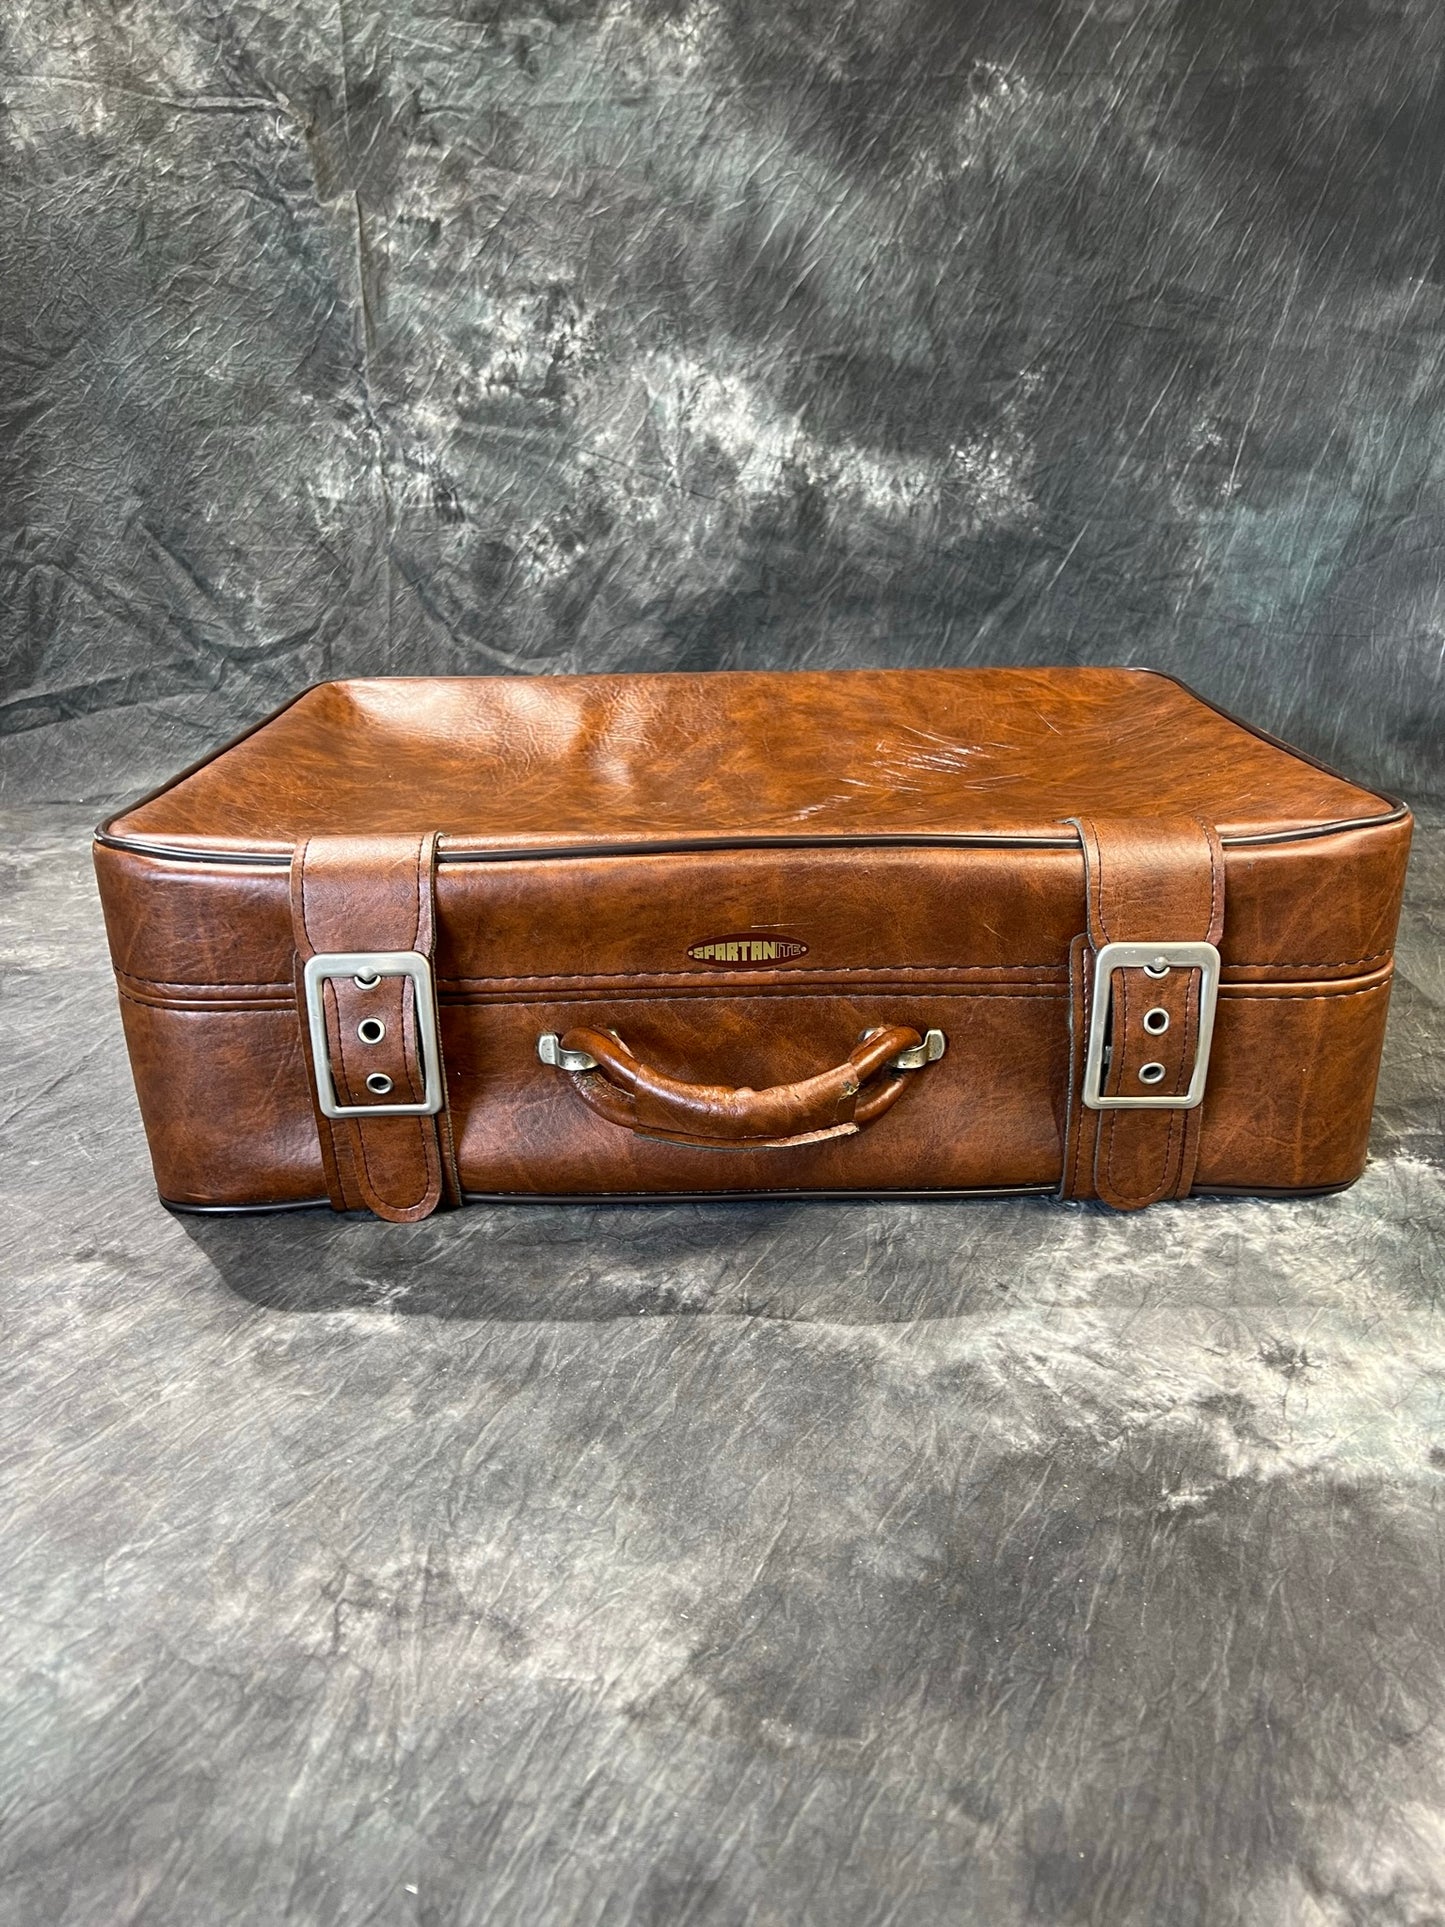 Vintage Brown Leather Suitcase Motor Luggage Retro Travel Trunk Boho Décor Display